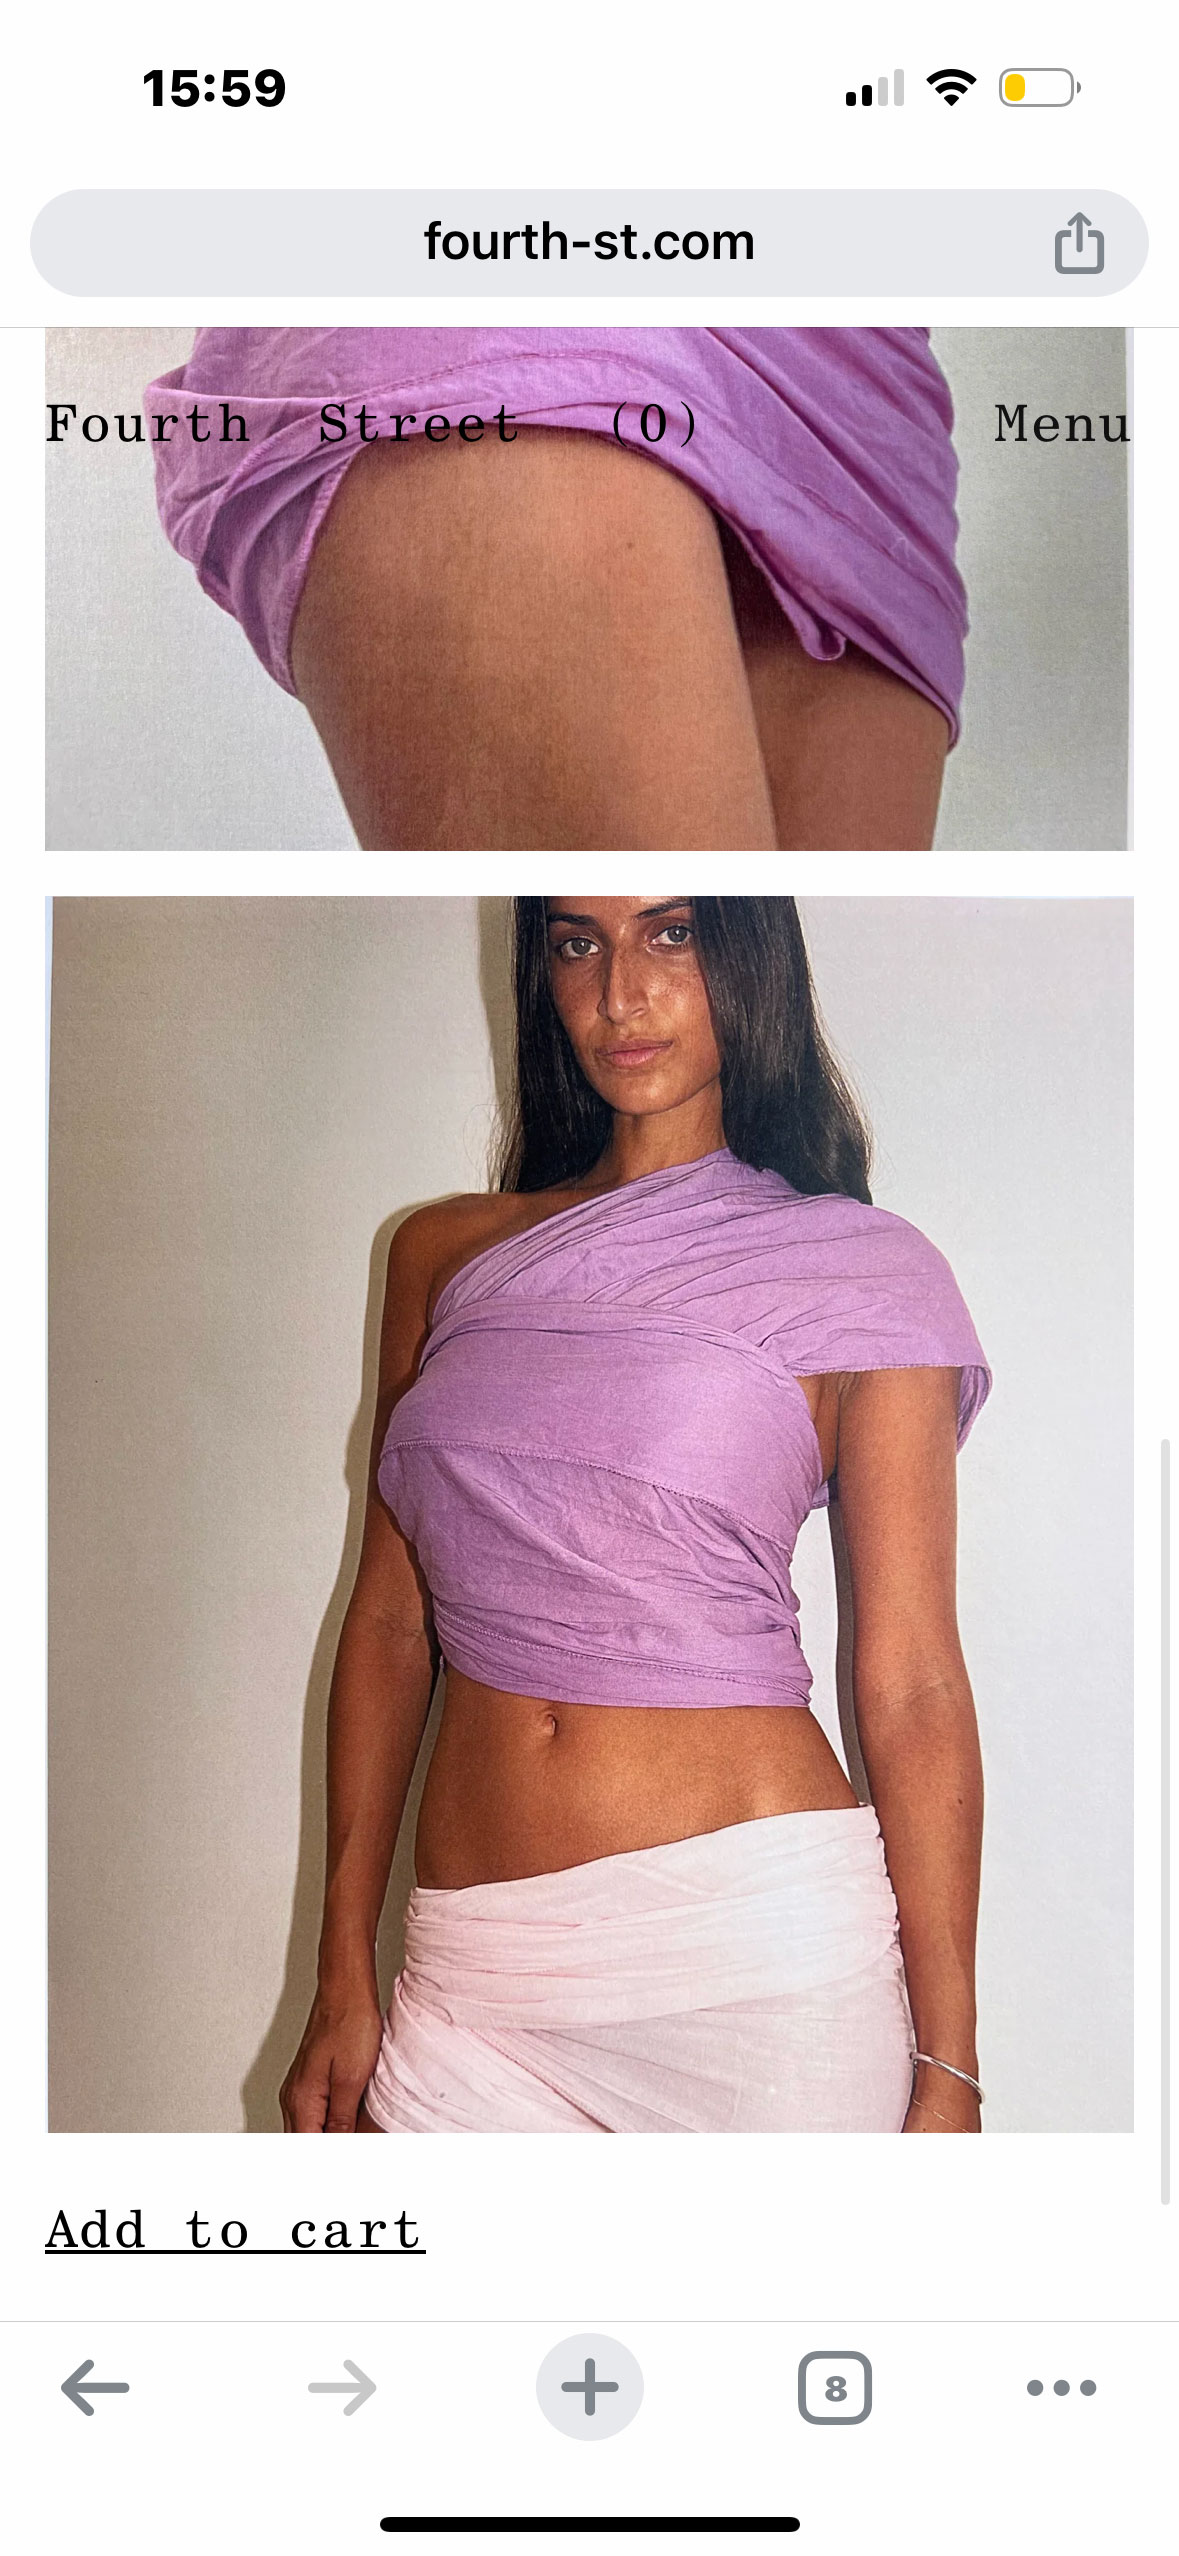 Adriano Orlando does the development for Fourth Street with Meide Engineering. Cotton Plum Sarong product page screenshot.